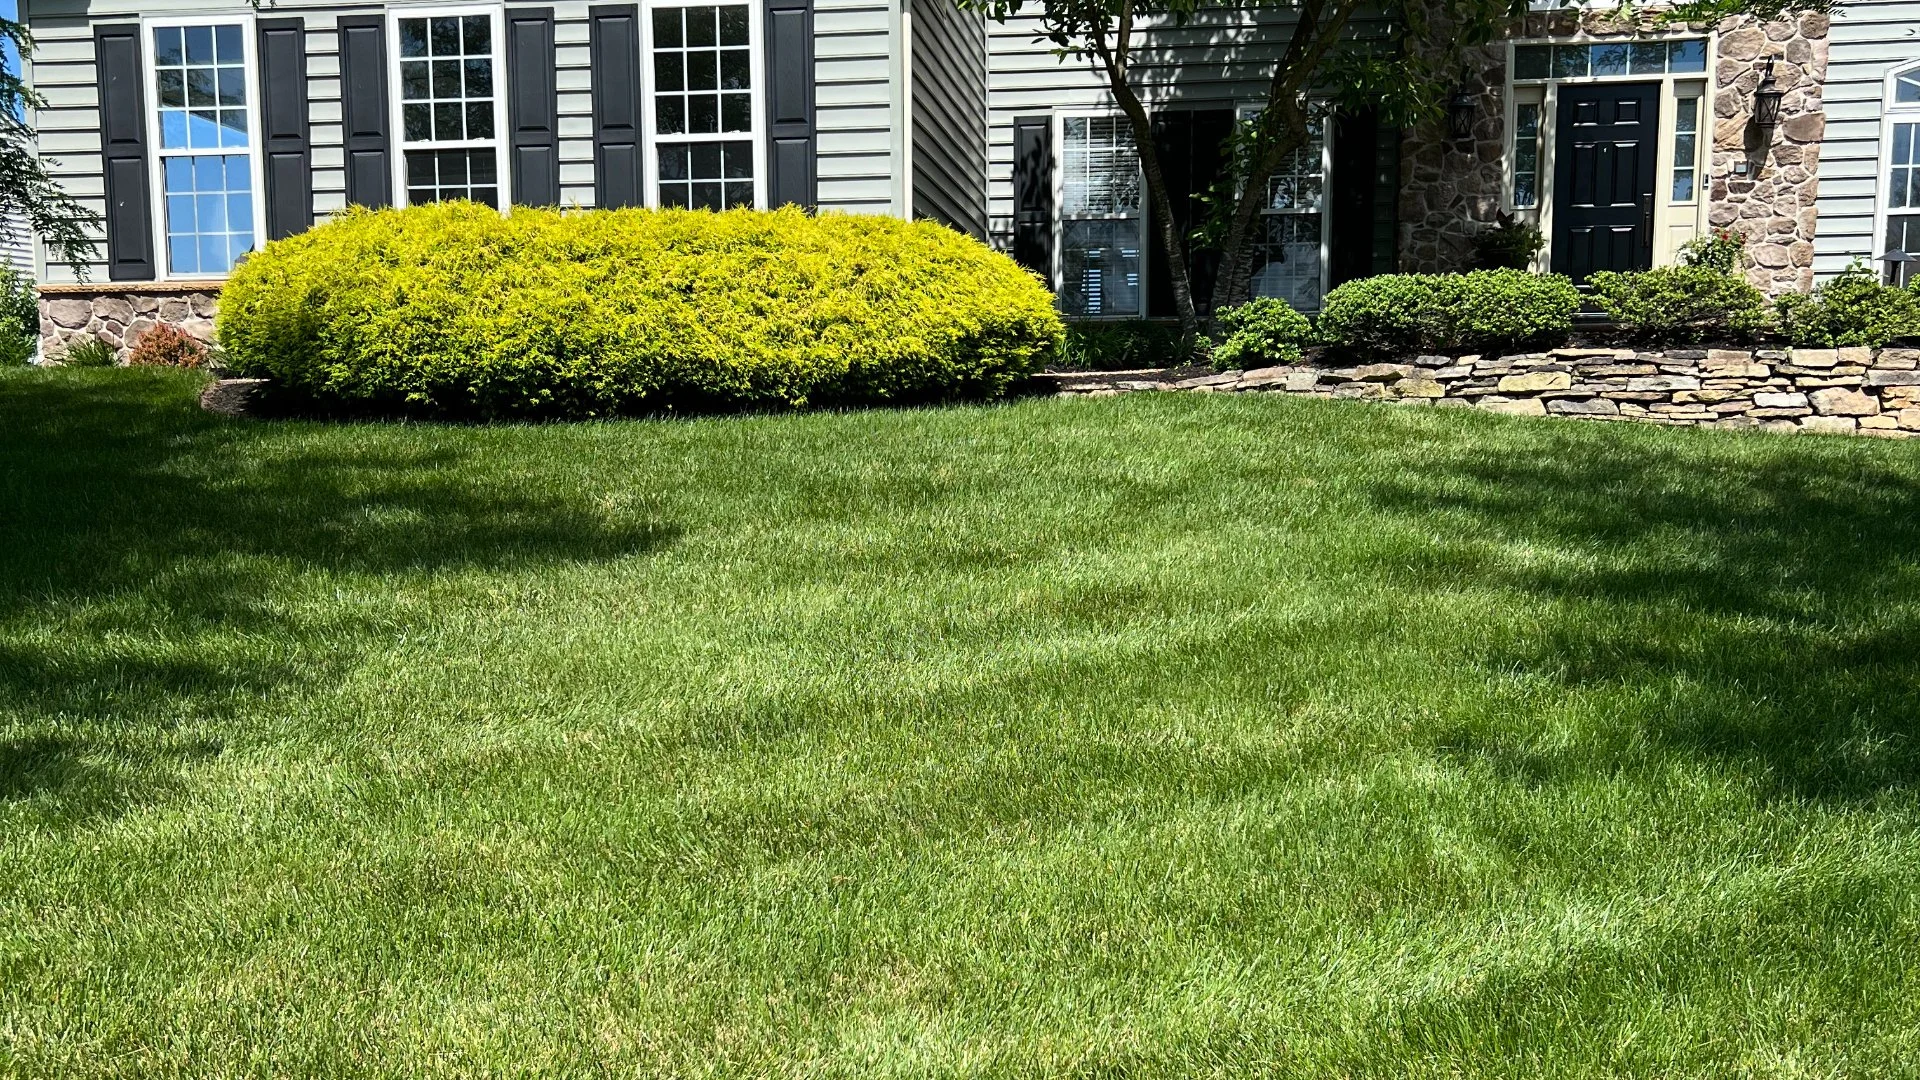 Why Is It Important to Avoid Overfertilizing Your Lawn?